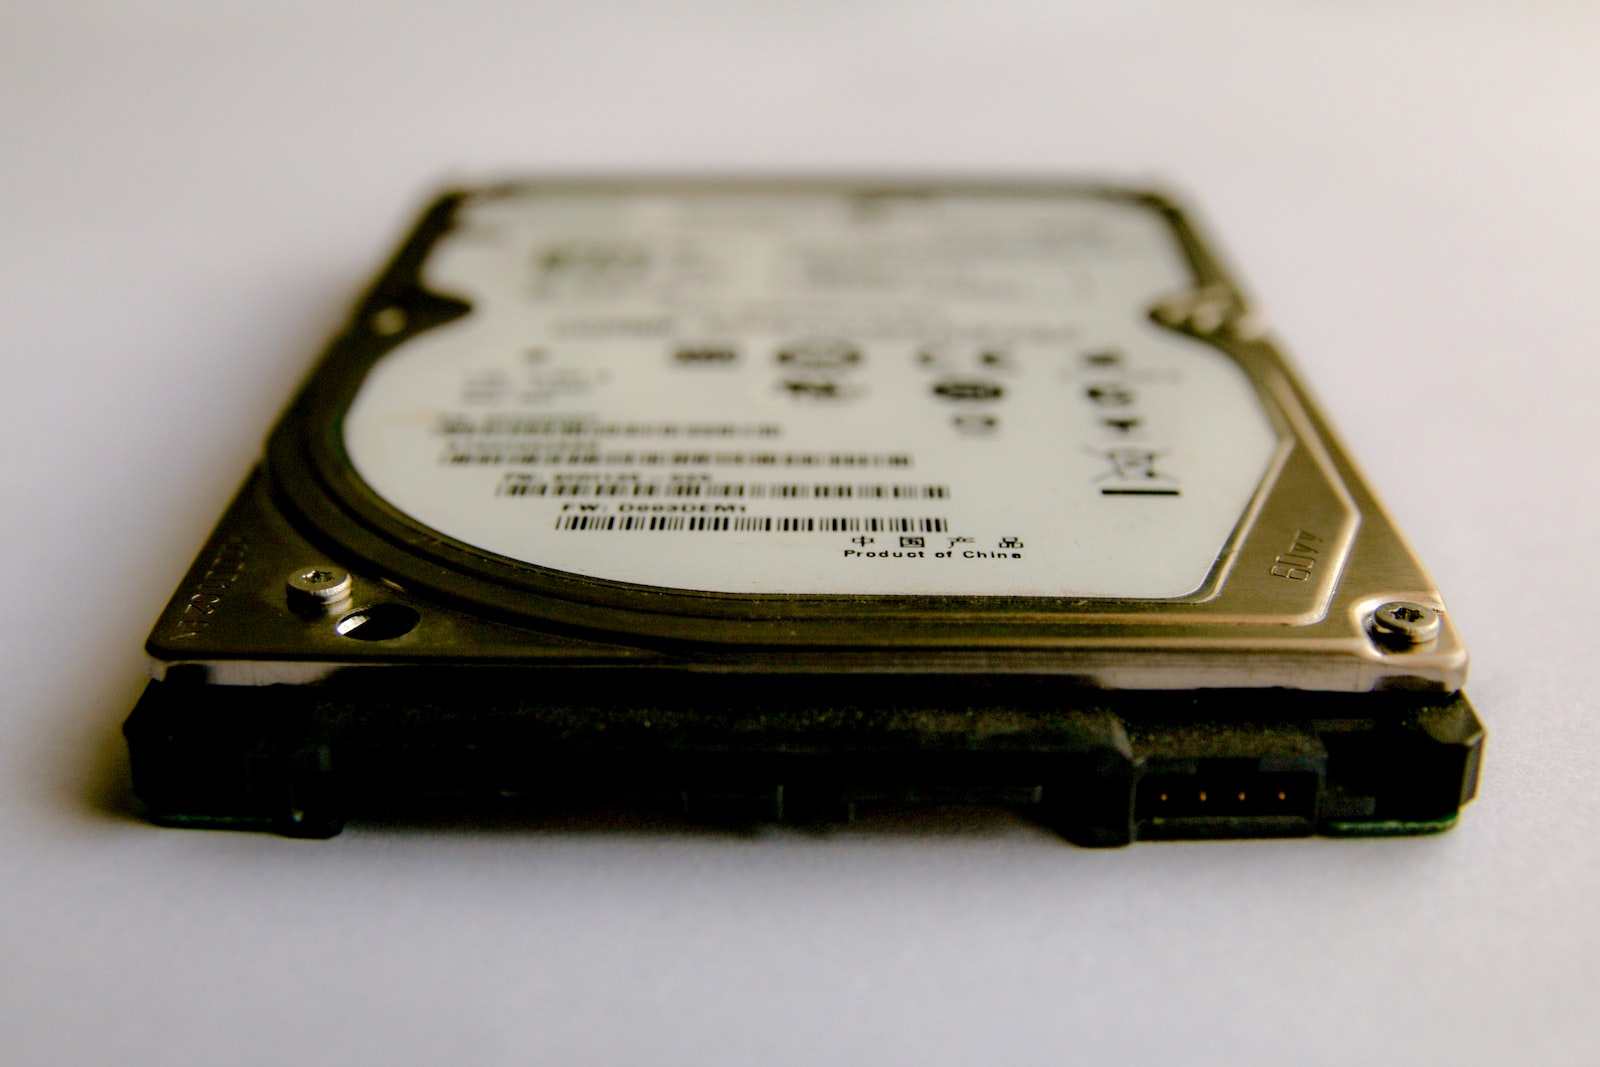 what does replacing hard drive do